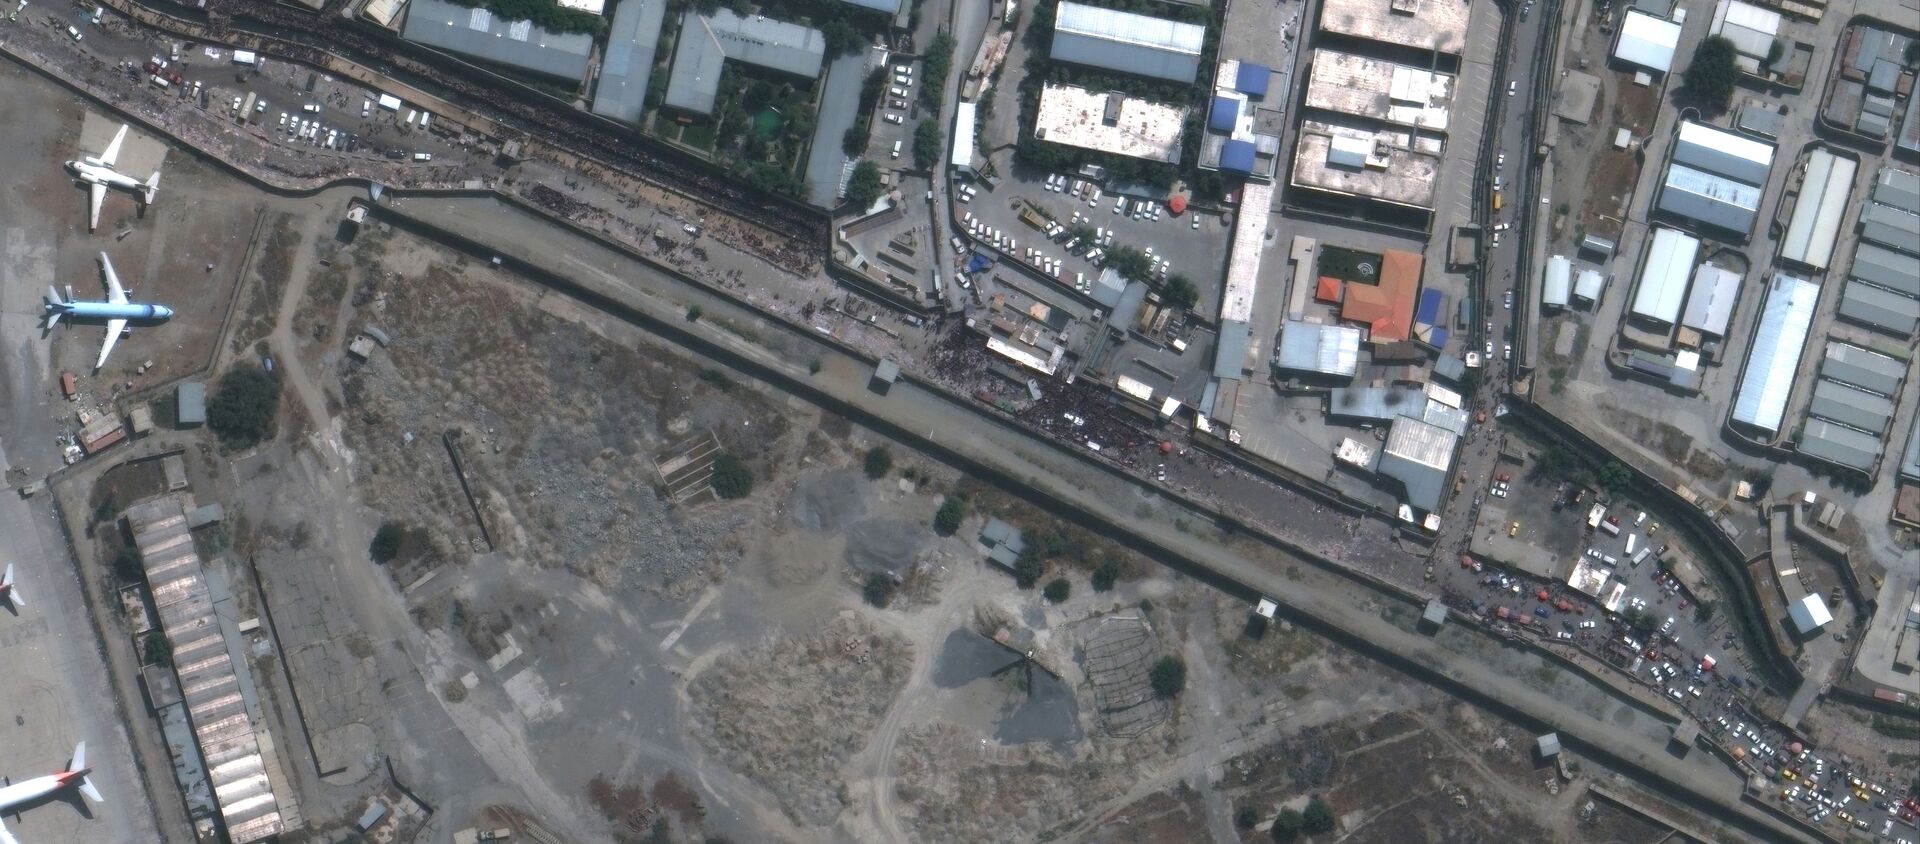 An overview of the Abbey Gate at Hamid Karzai International Airport, in Kabul, Afghanistan August 23, 2021, in this satellite image obtained by Reuters on August 26, 2021. - Sputnik International, 1920, 26.08.2021